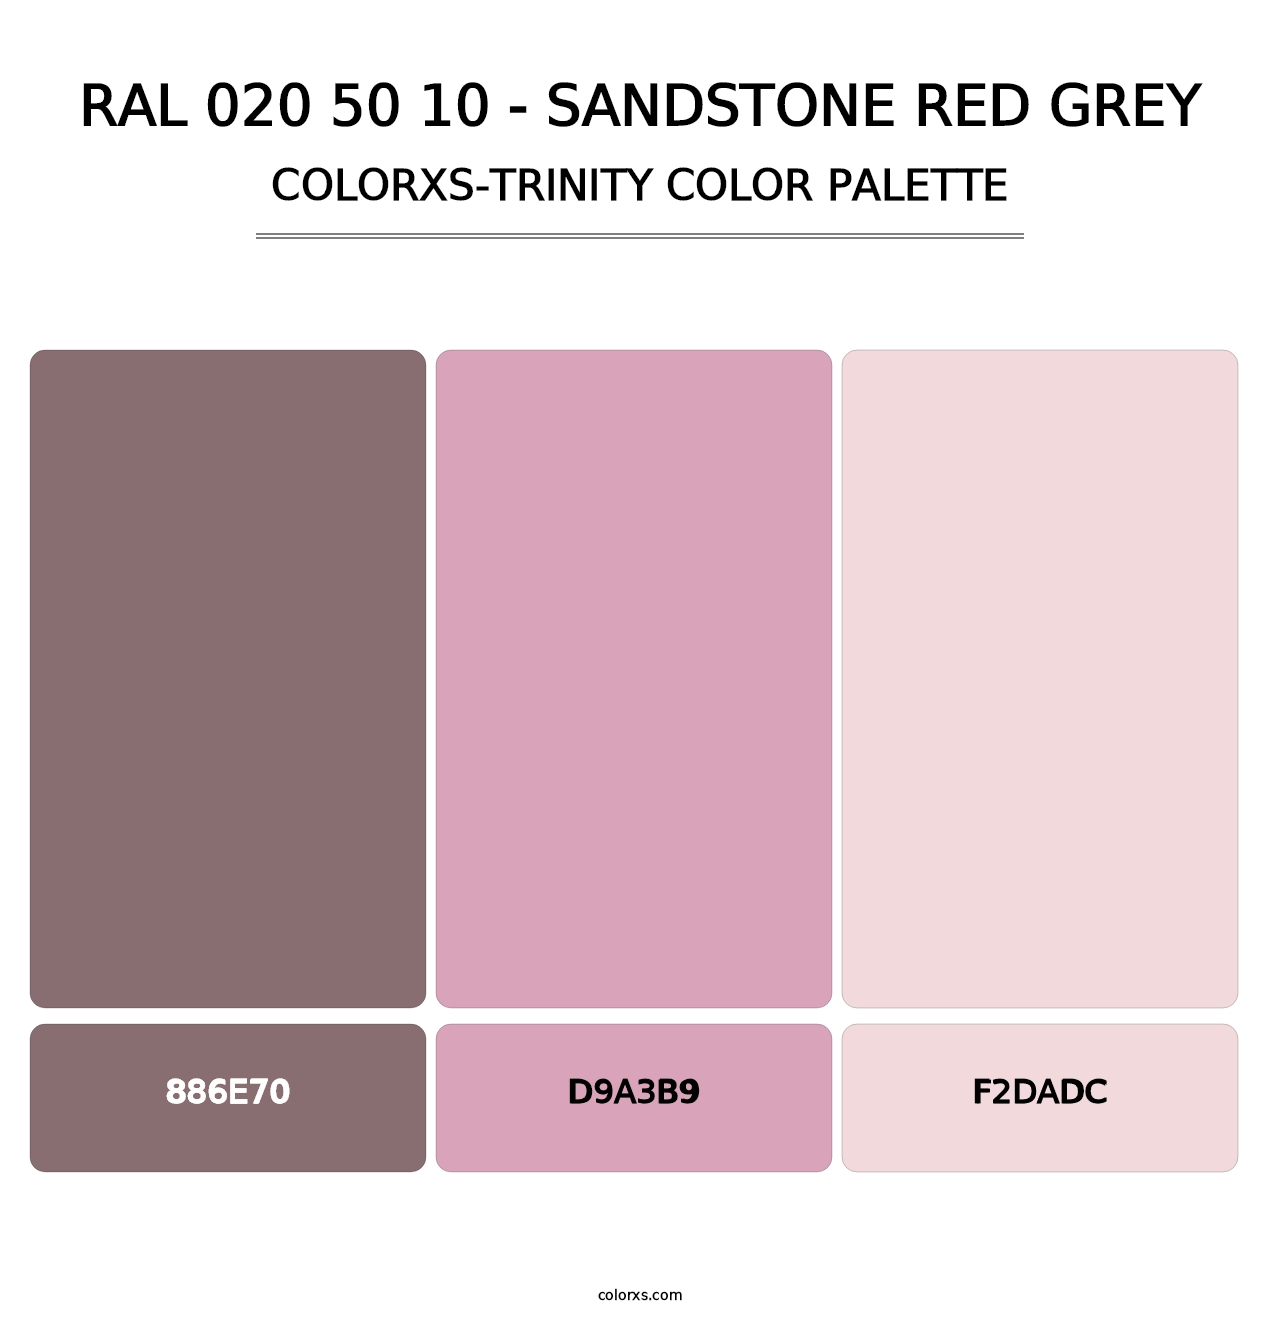 RAL 020 50 10 - Sandstone Red Grey - Colorxs Trinity Palette